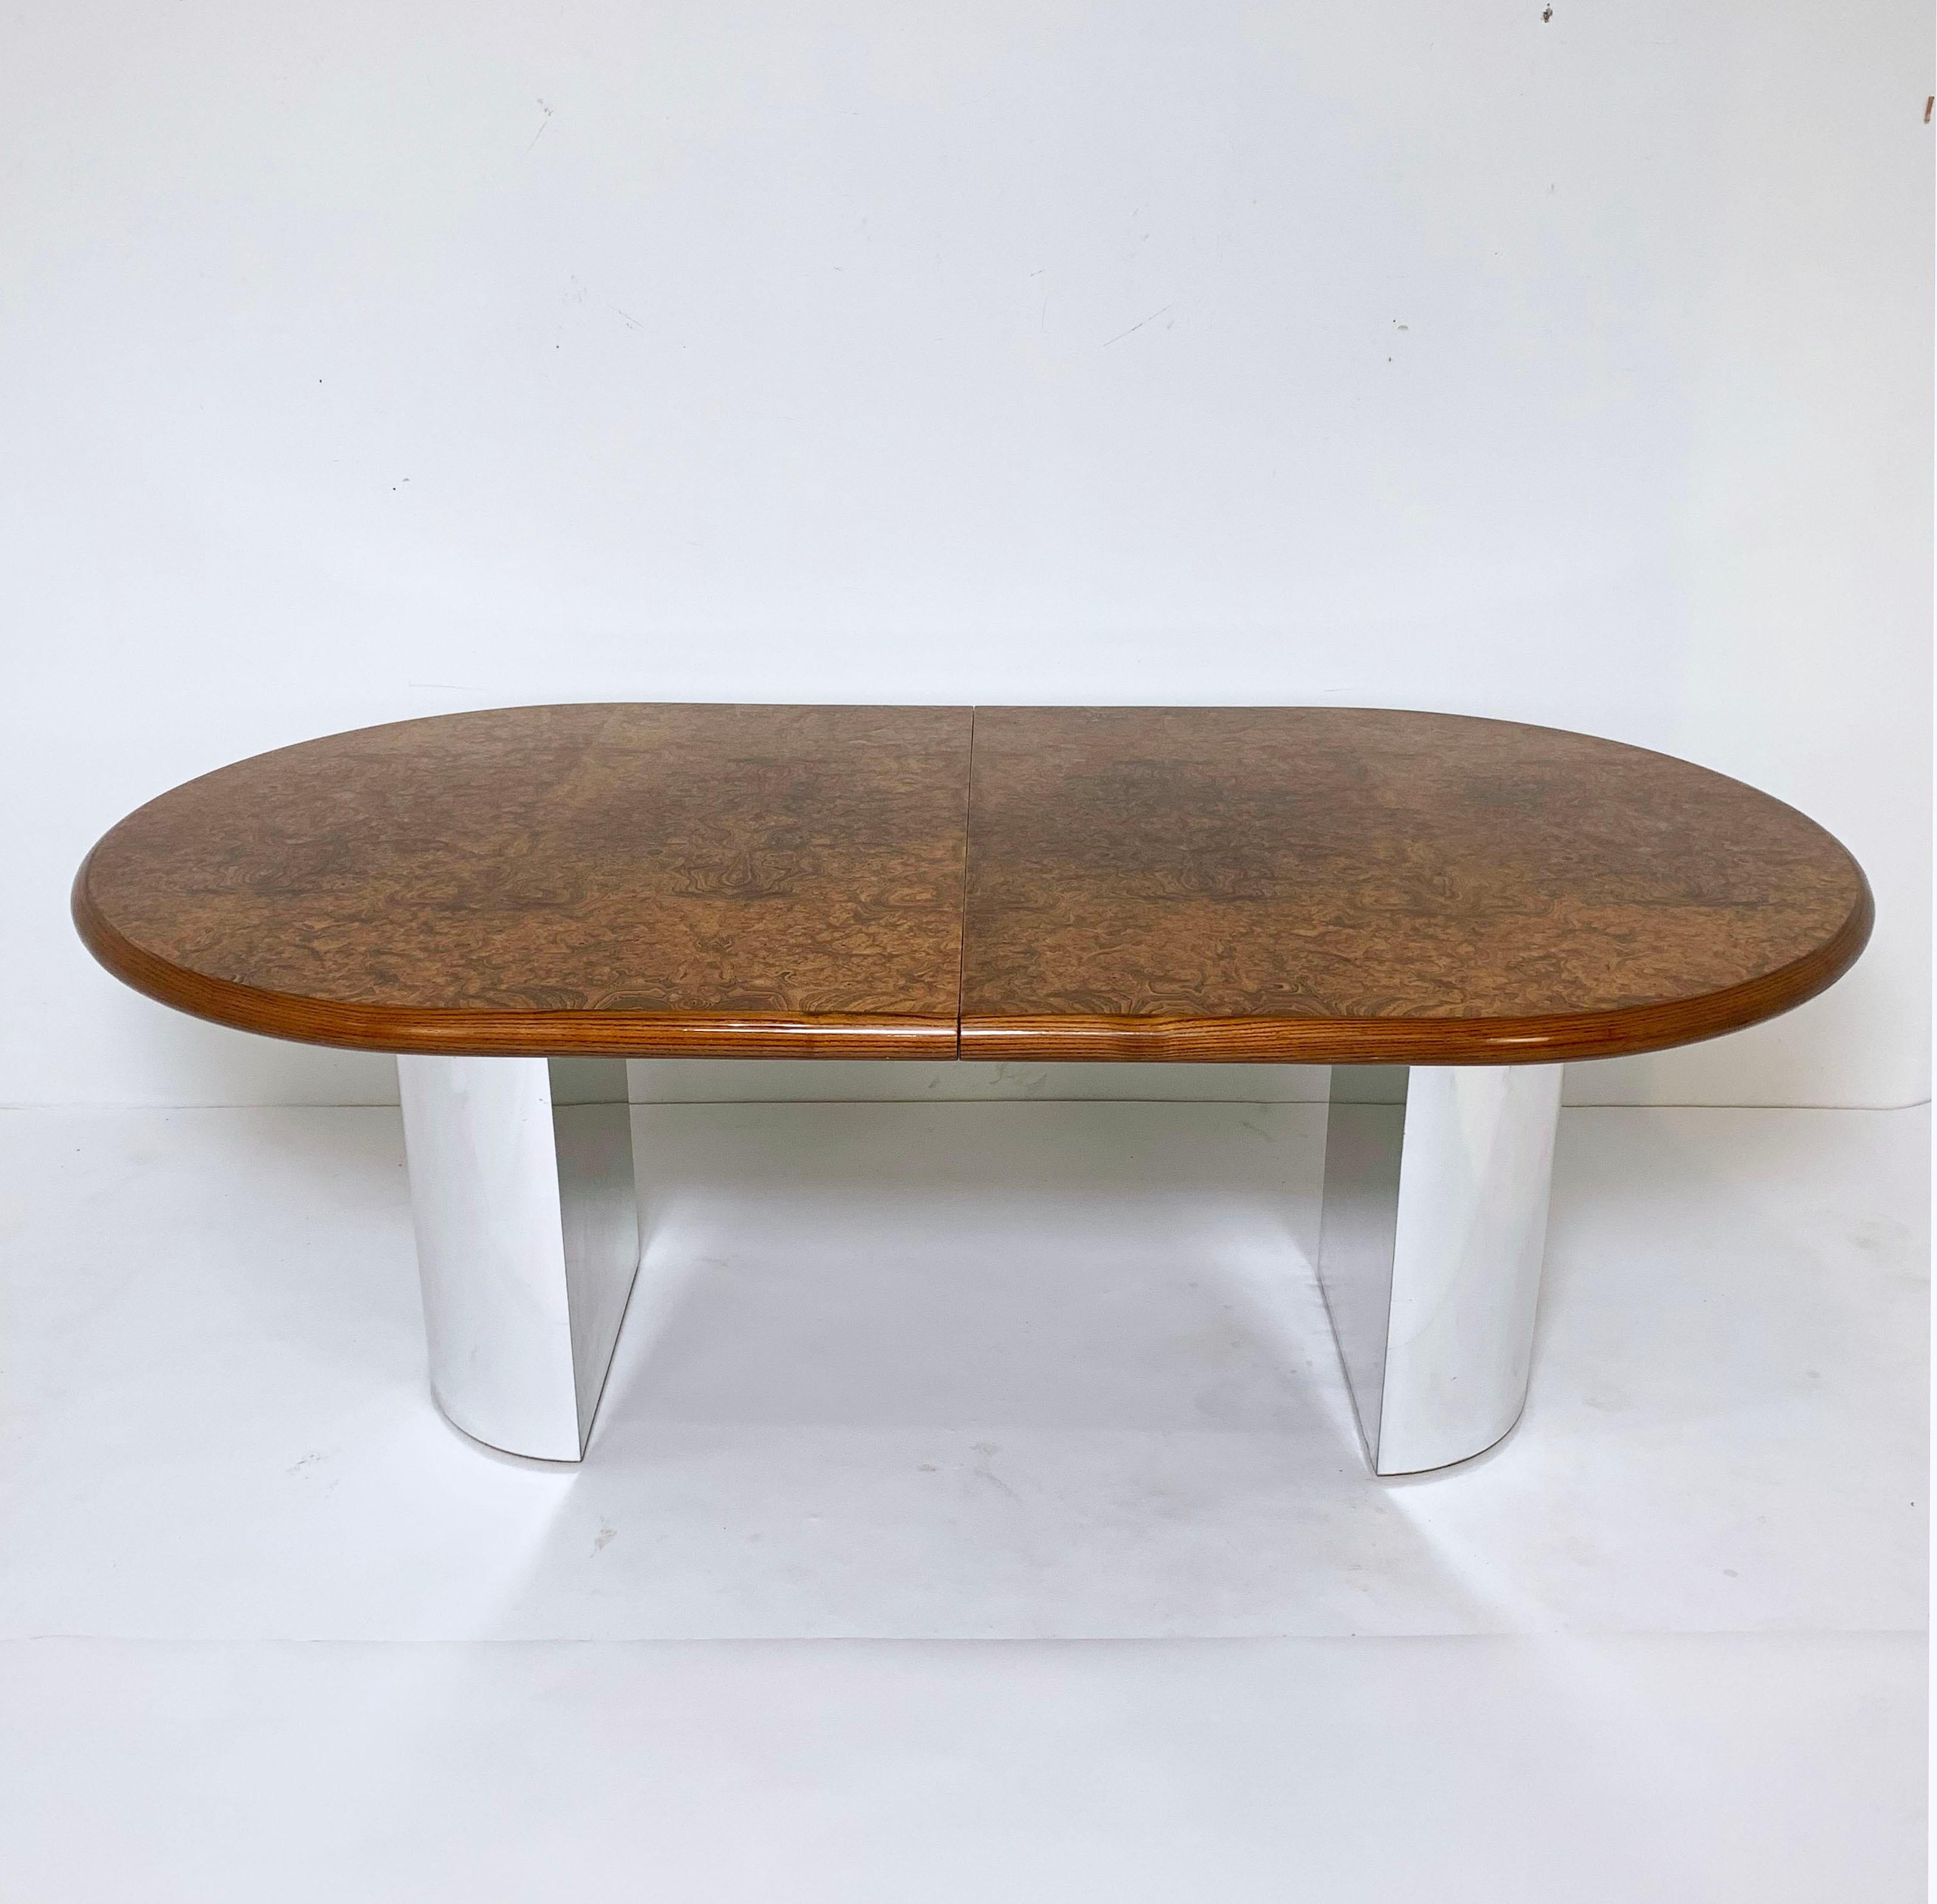 An oval dining table in burl wood and ash with chromed steel demilune pedestals. Designed by Paul Mayen for Intrex Habitat International, circa 1980s, it features a wide bullnose edge similar to many of Karl Springer’s tables of the same period.